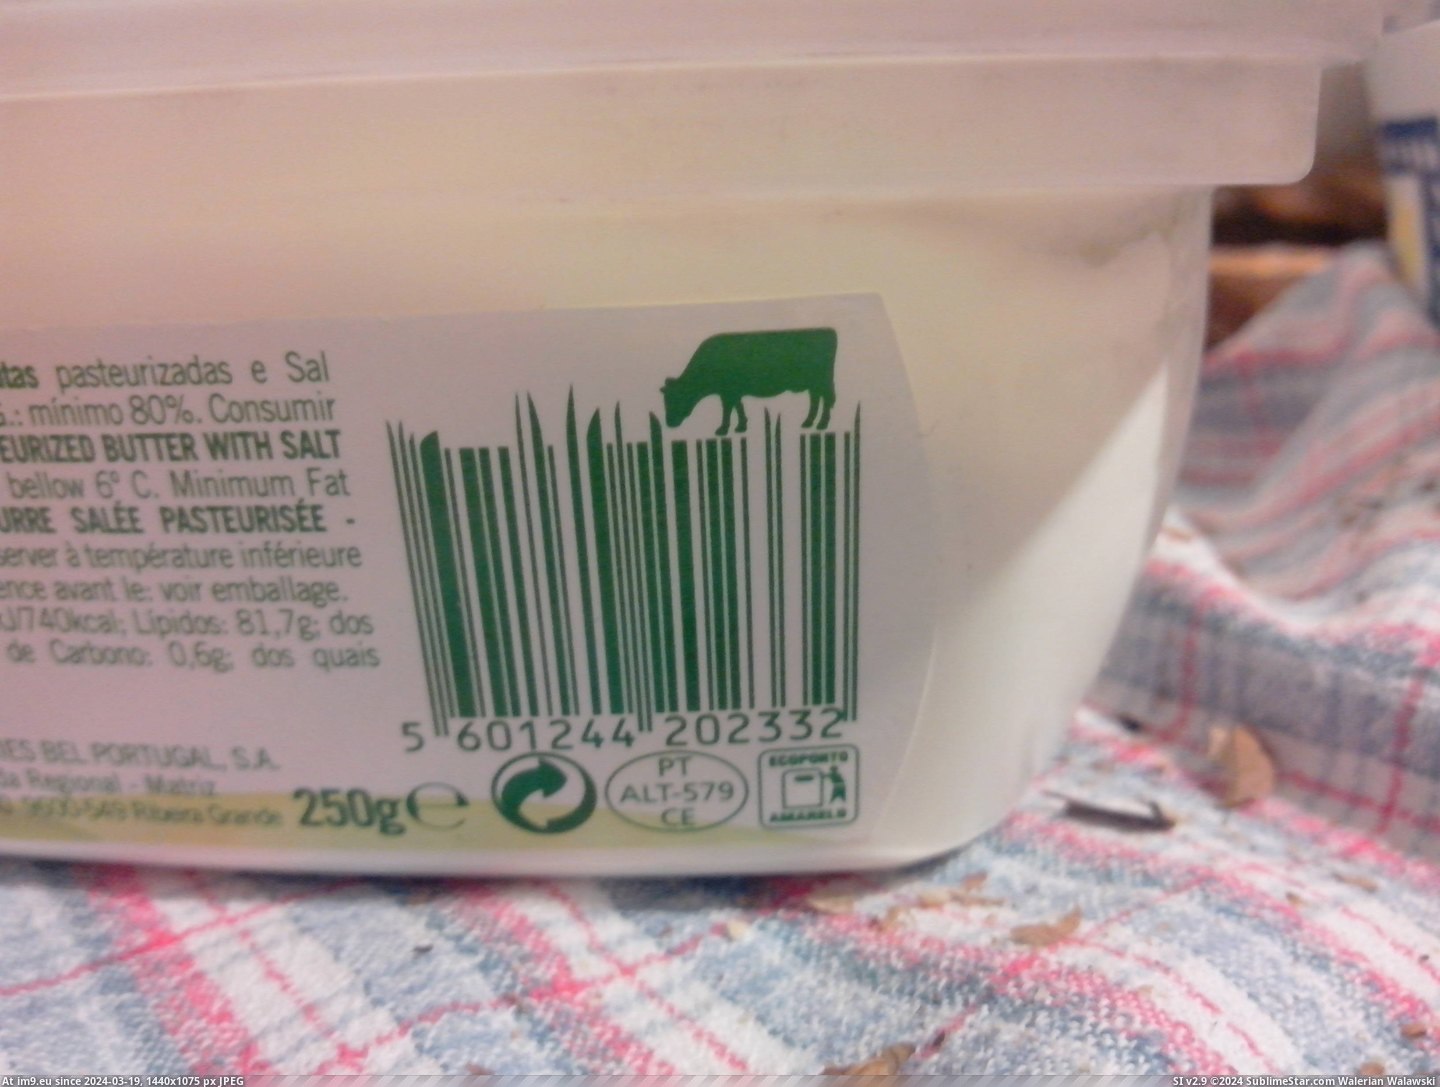 #Cow #Butter #Barcode #Eaten [Mildlyinteresting] This butter's barcode is being eaten by a cow Pic. (Изображение из альбом My r/MILDLYINTERESTING favs))